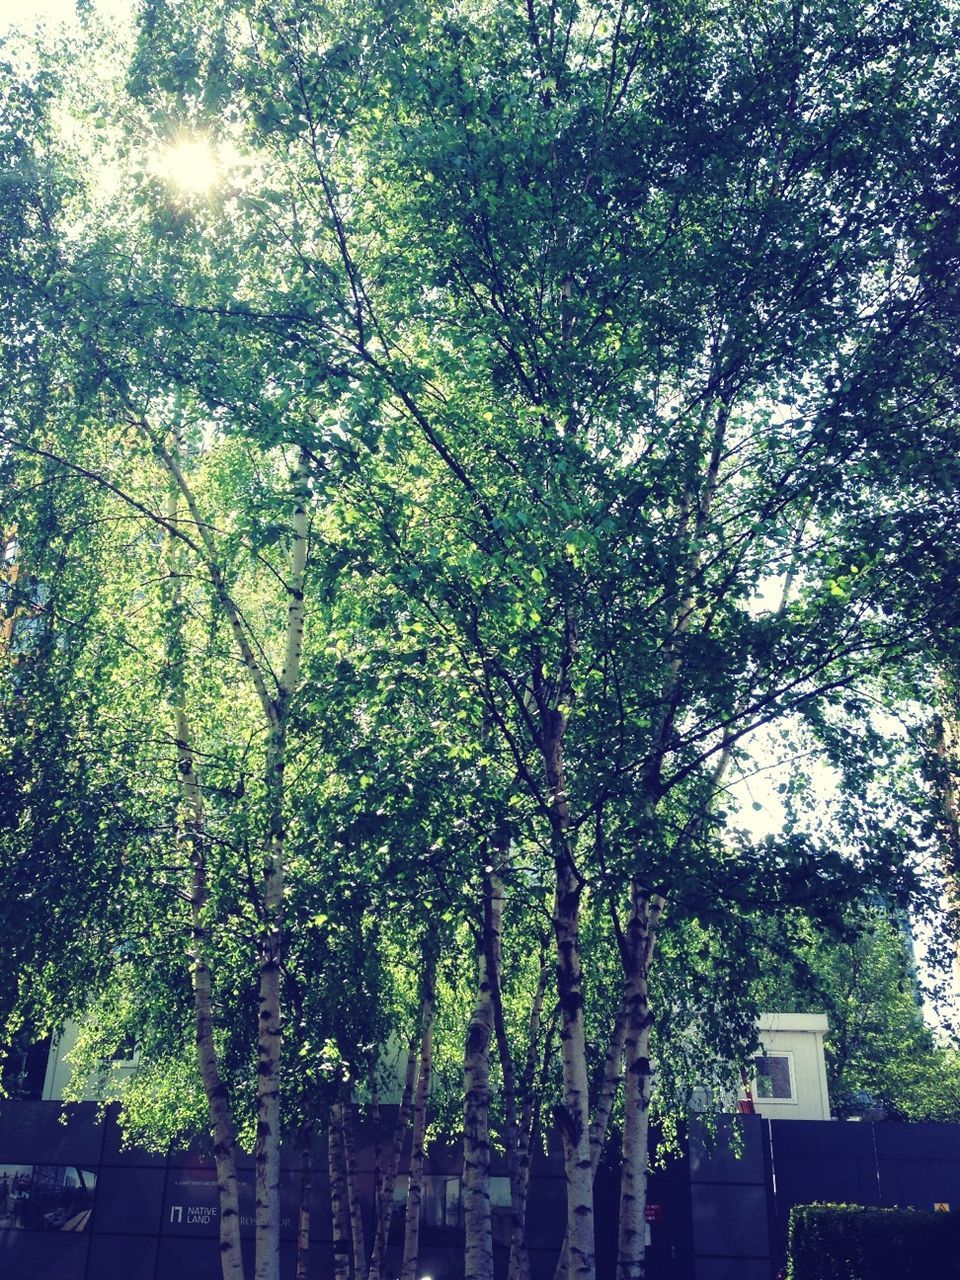 tree, growth, low angle view, branch, nature, tranquility, tree trunk, green color, beauty in nature, built structure, building exterior, day, outdoors, sunlight, no people, sky, lush foliage, architecture, tranquil scene, scenics